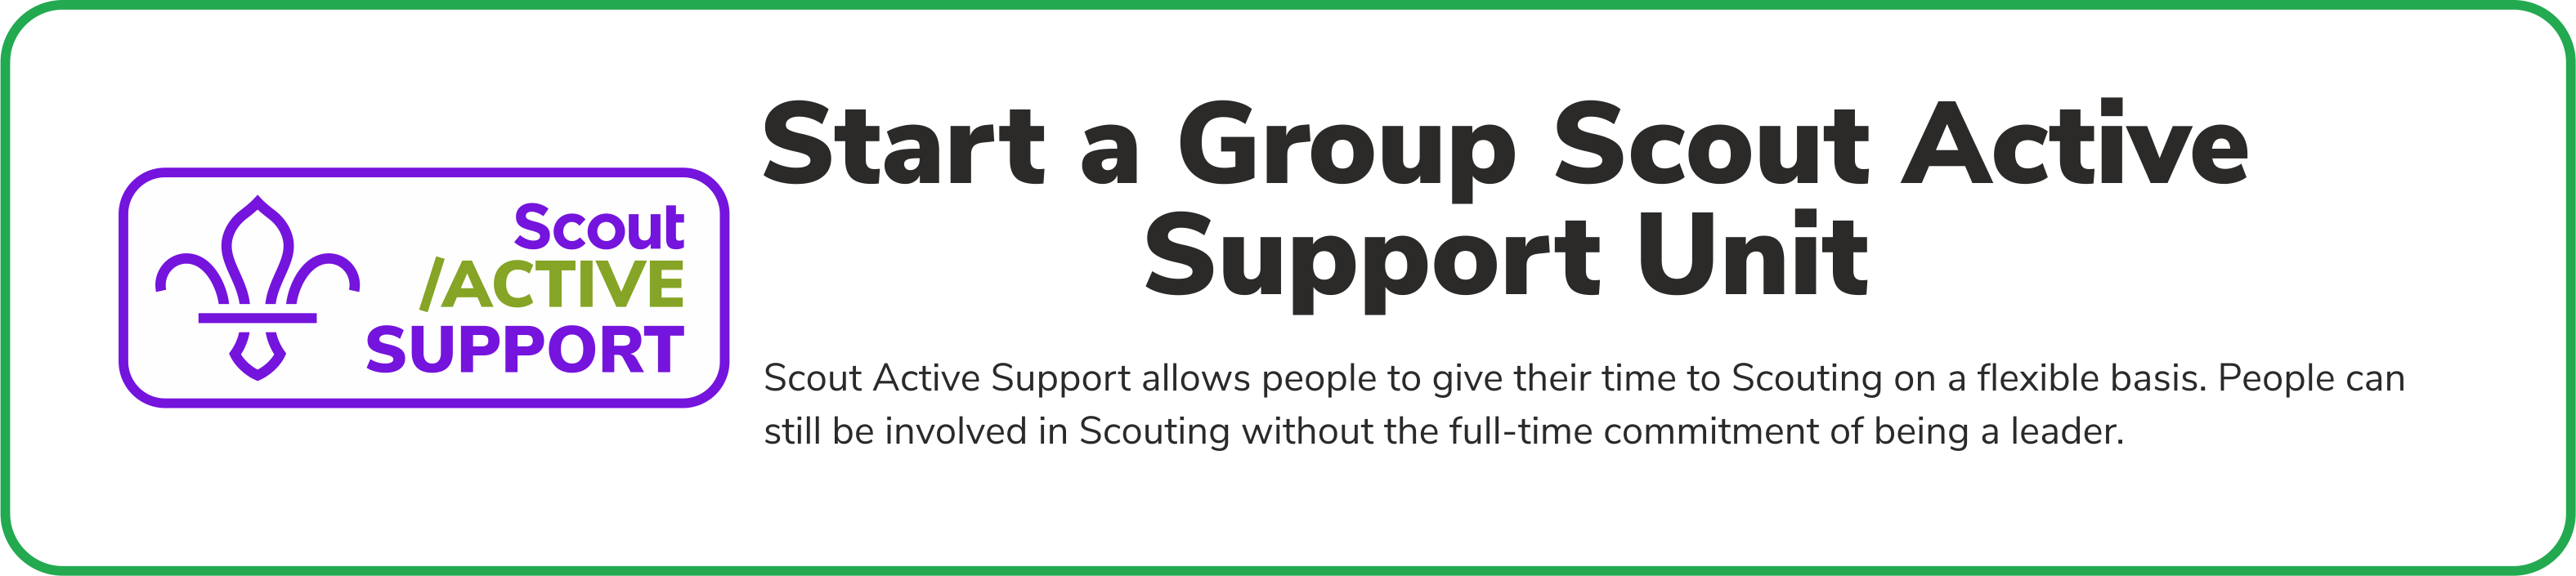 Start a Scout Active Support Unit